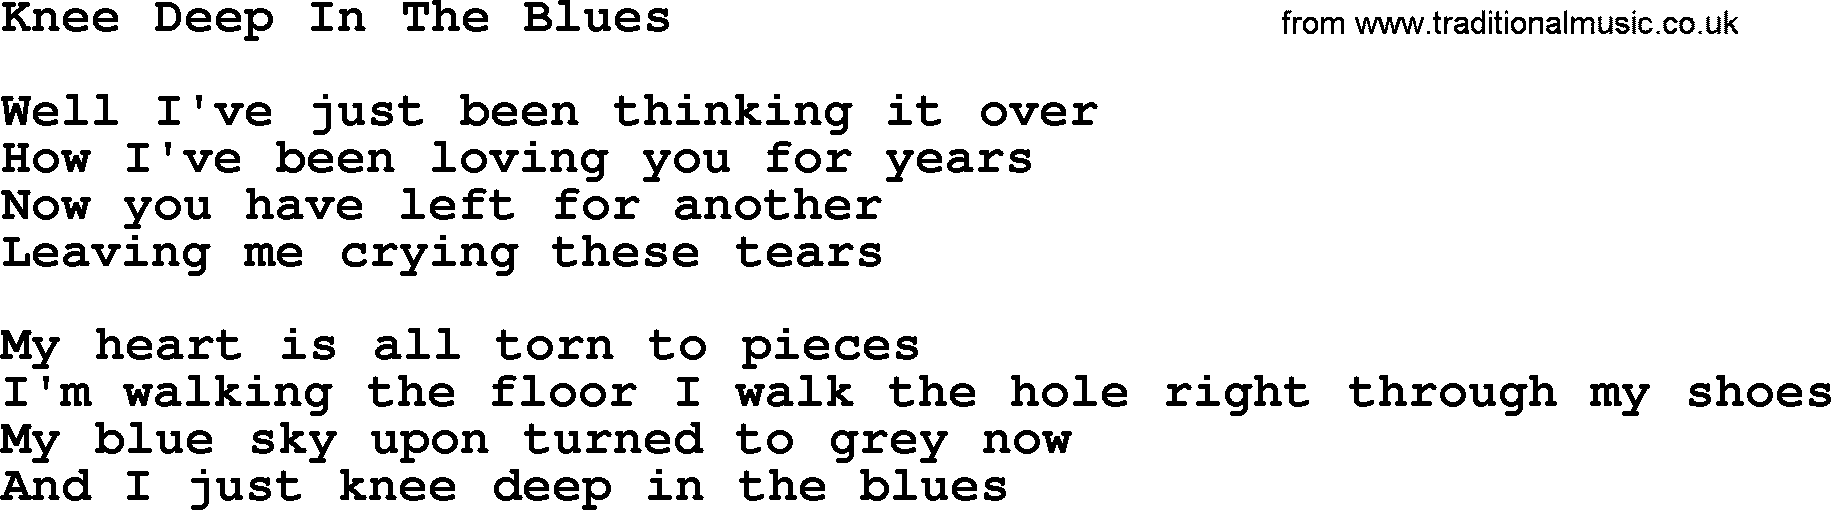 The Byrds song Knee Deep In The Blues, lyrics